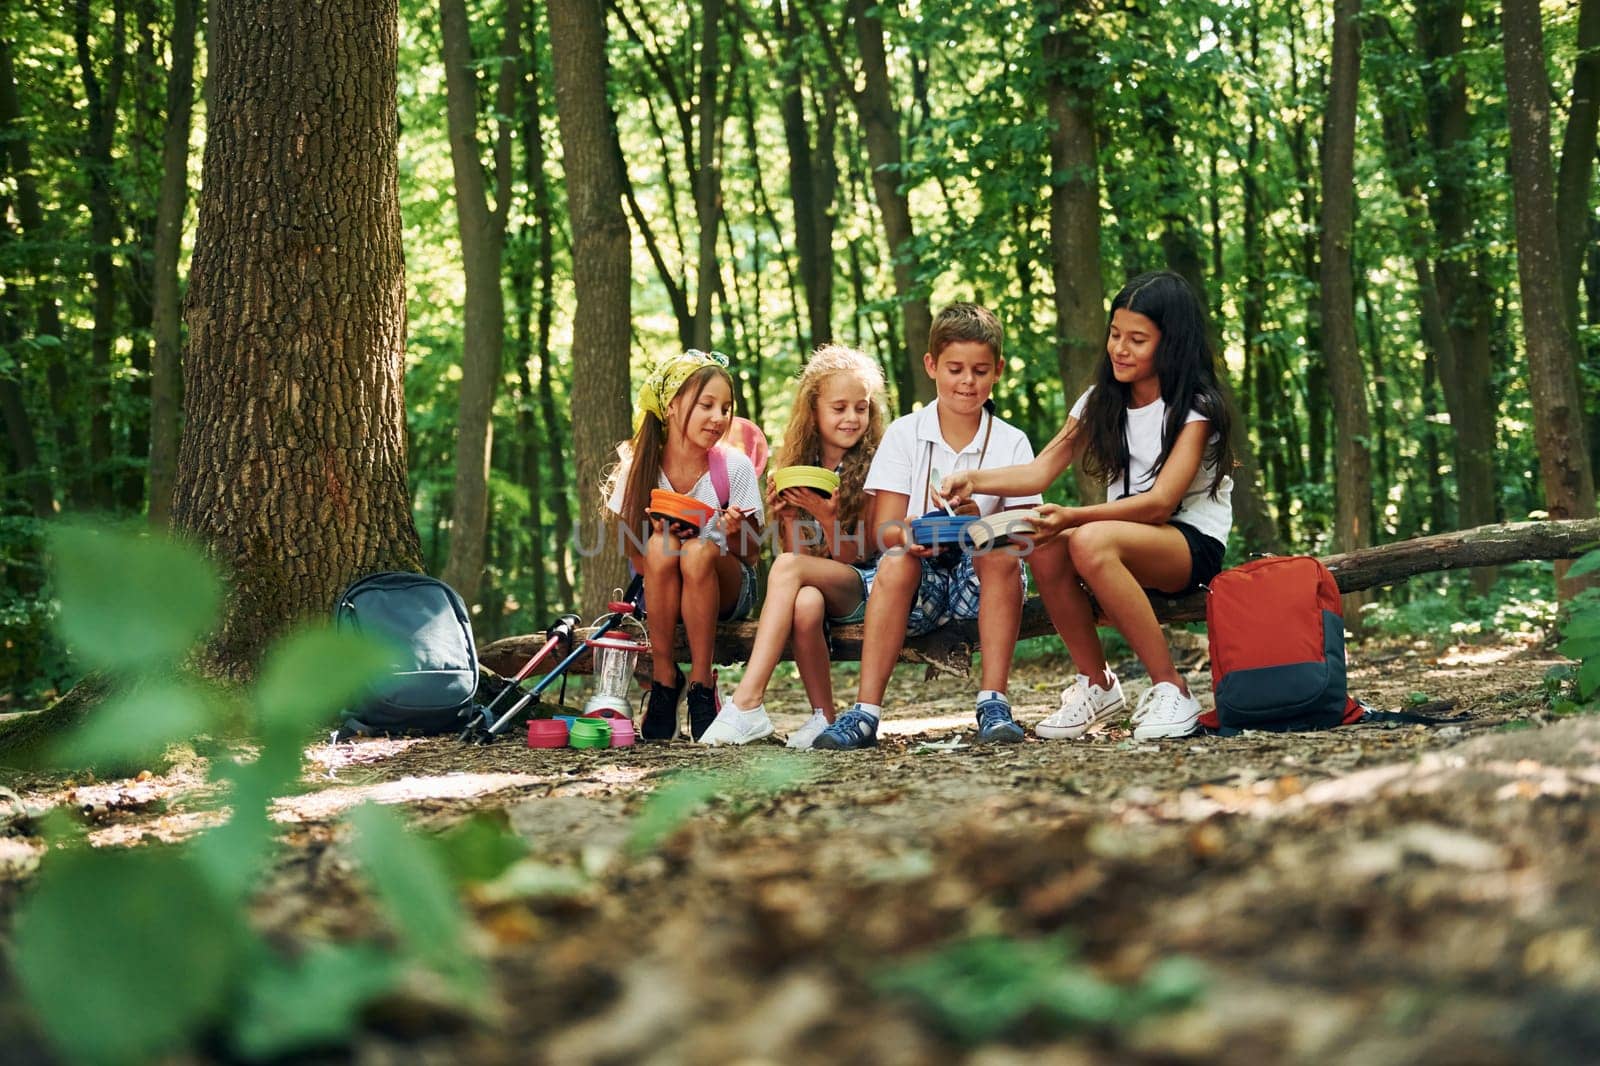 Sitting and having a rest. Kids strolling in the forest with travel equipment by Standret